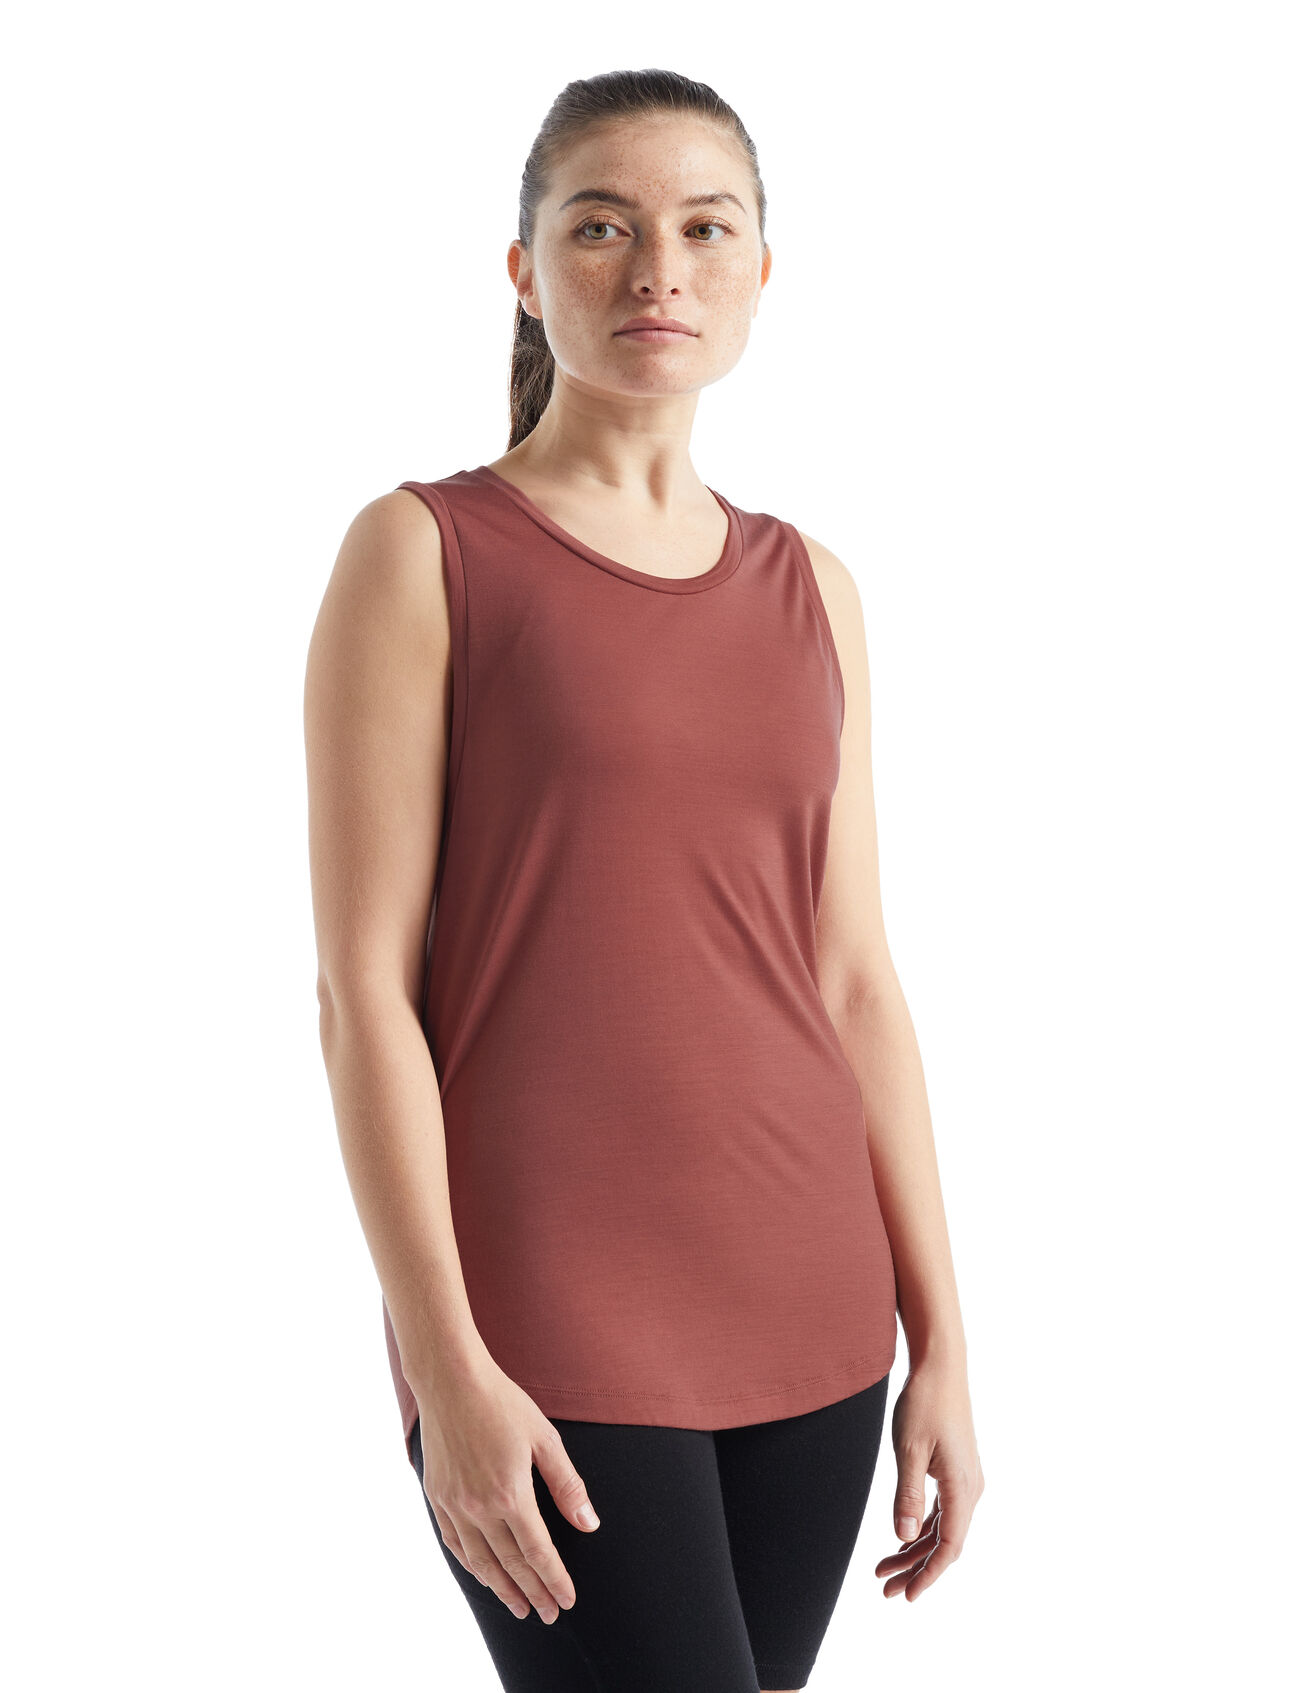 Womens Merino Sphere II Tank A soft merino-blend top made with our lightweight Cool-Lite™ jersey fabric, the Sphere II Tank provides natural breathability, odor resistance and comfort.